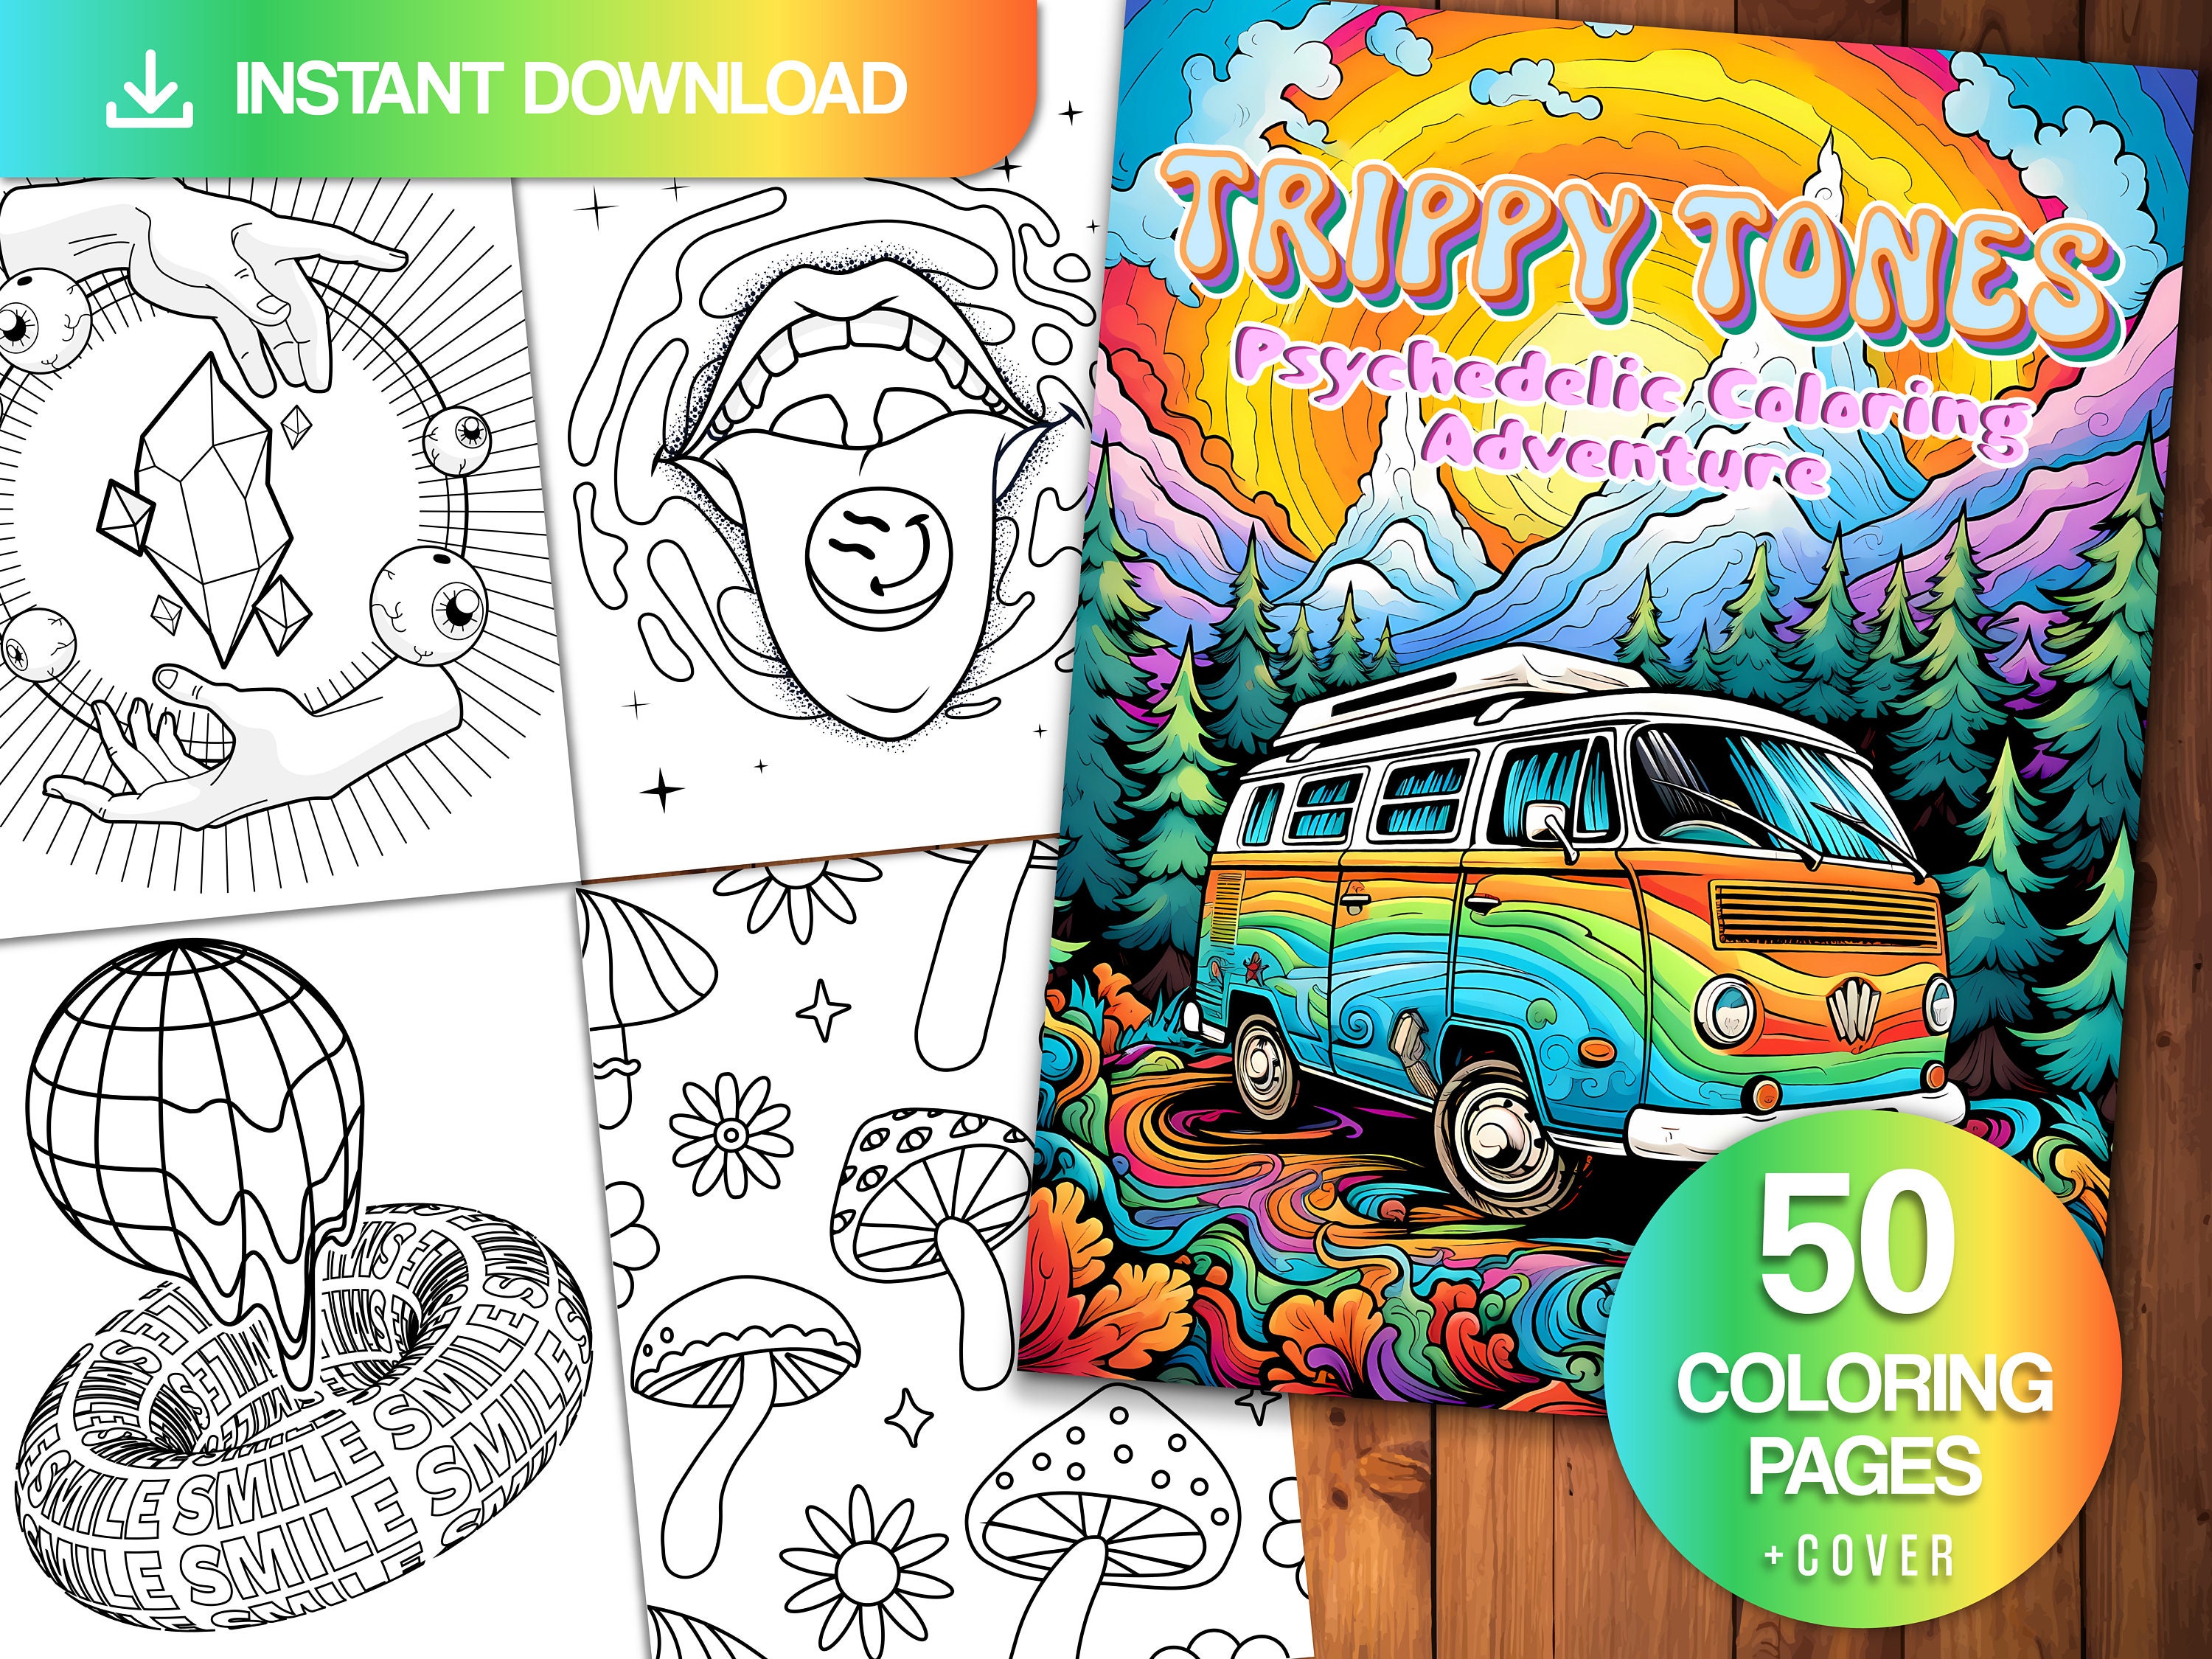 Stoner Coloring Book For Adults: A Trippy Coloring Book For Adults, 45  Psychedelic Stoners Coloring Pages For Stress Relief And Relaxation  (Paperback)